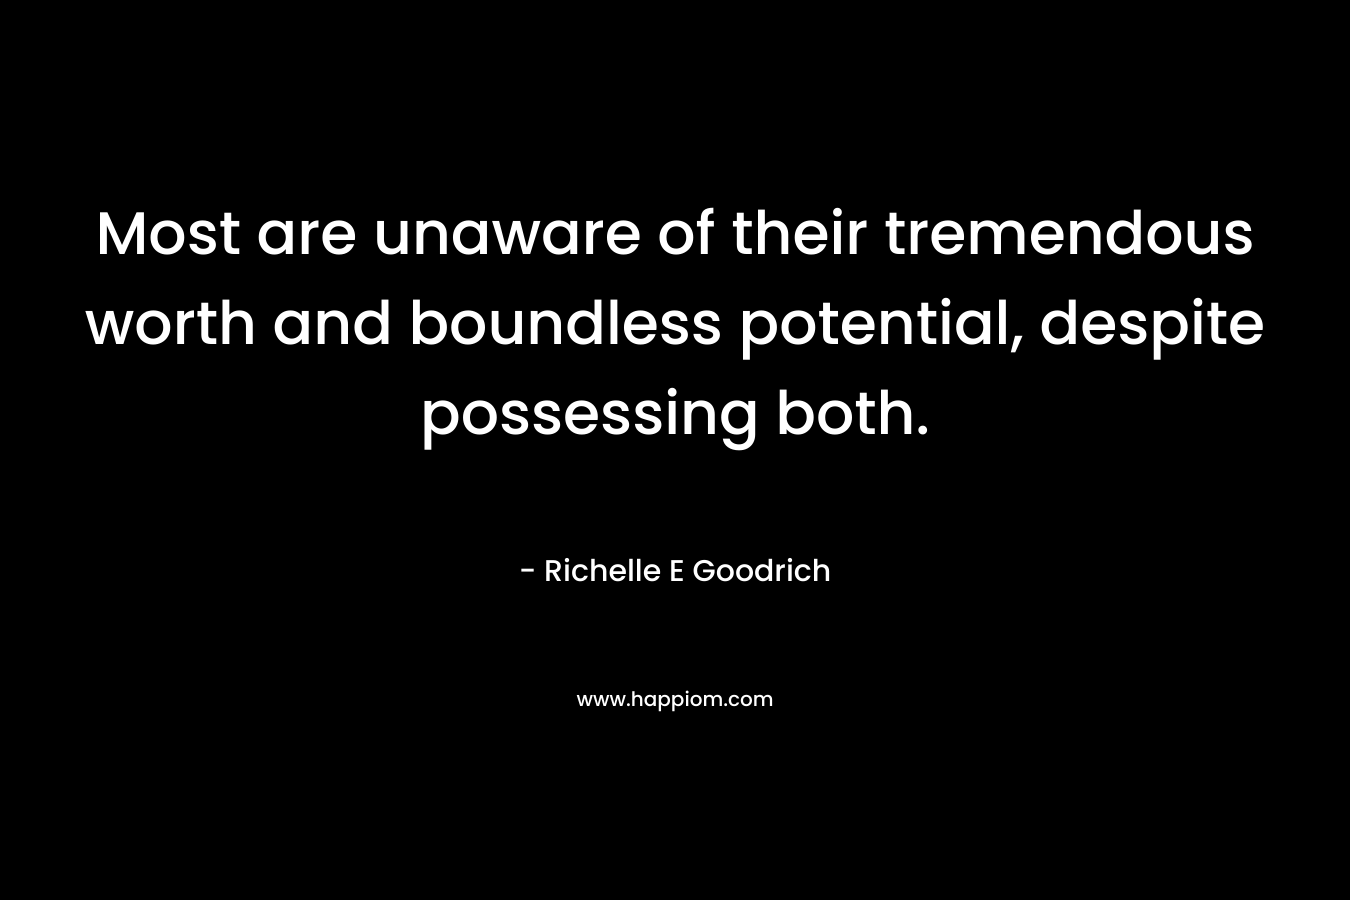 Most are unaware of their tremendous worth and boundless potential, despite possessing both. – Richelle E Goodrich